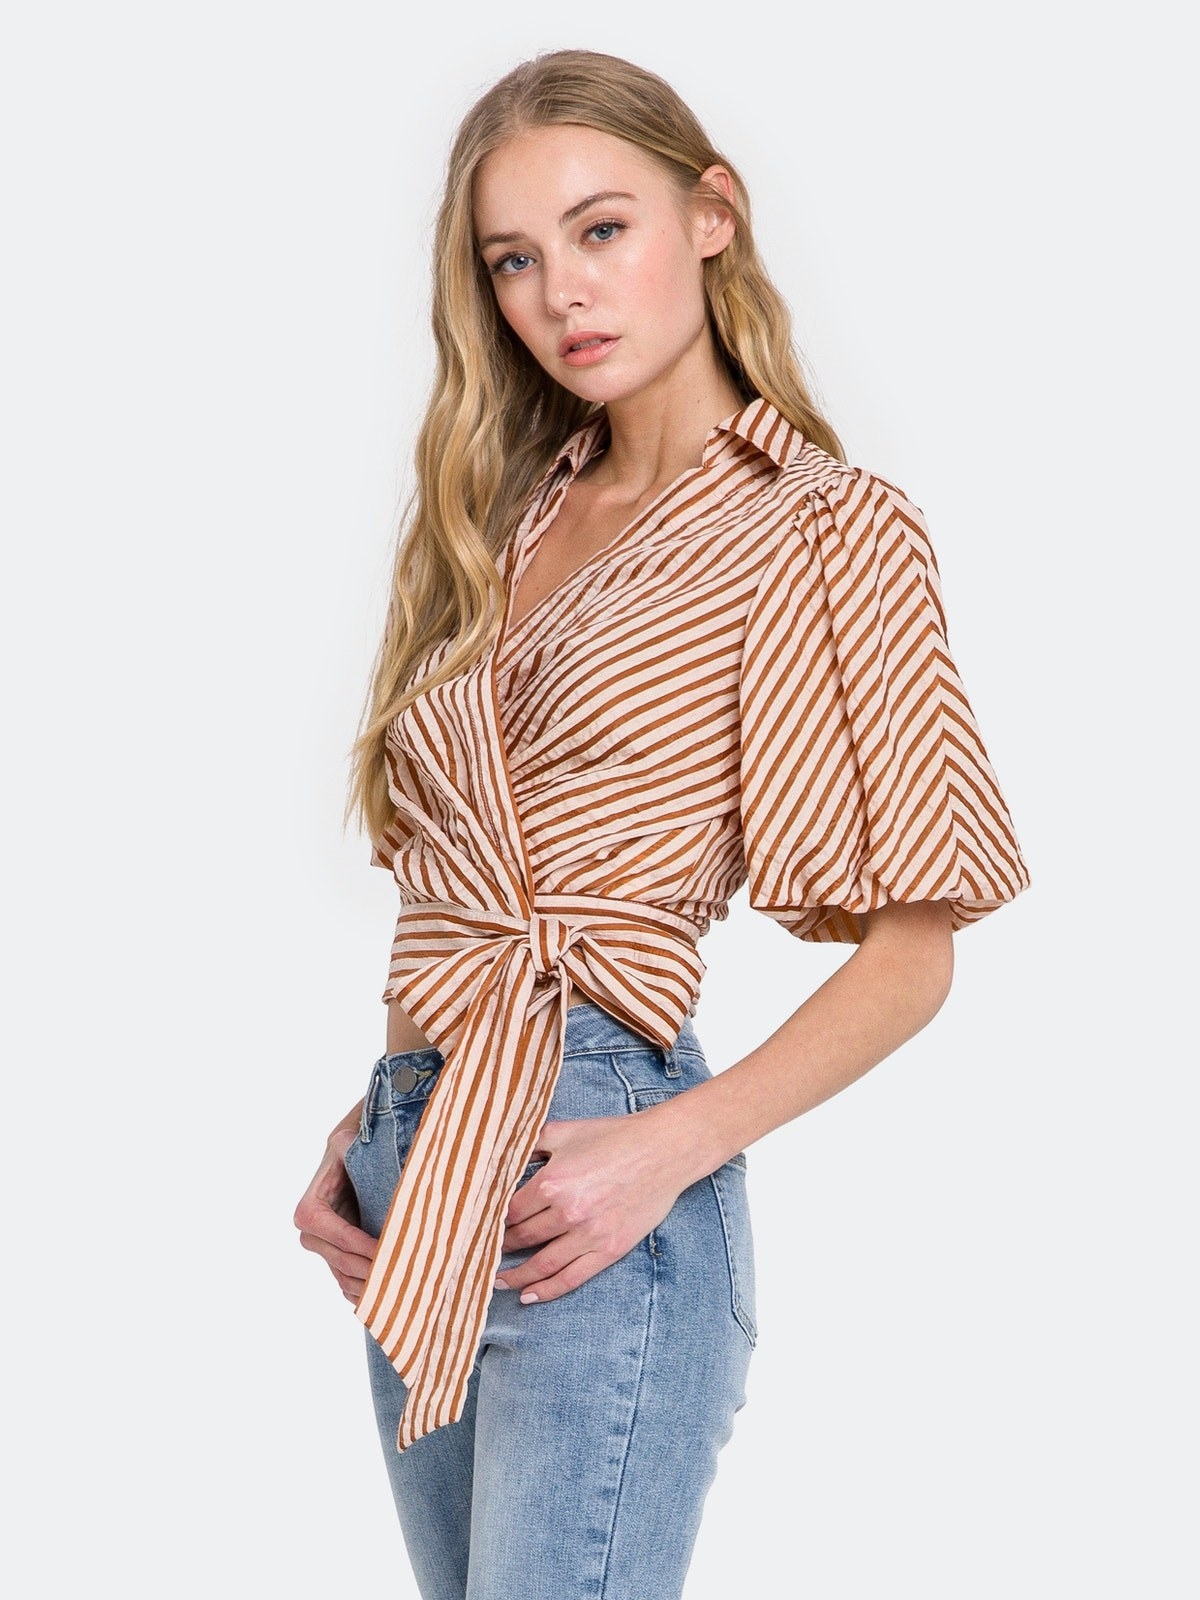 Model wearing the brown and white striped top